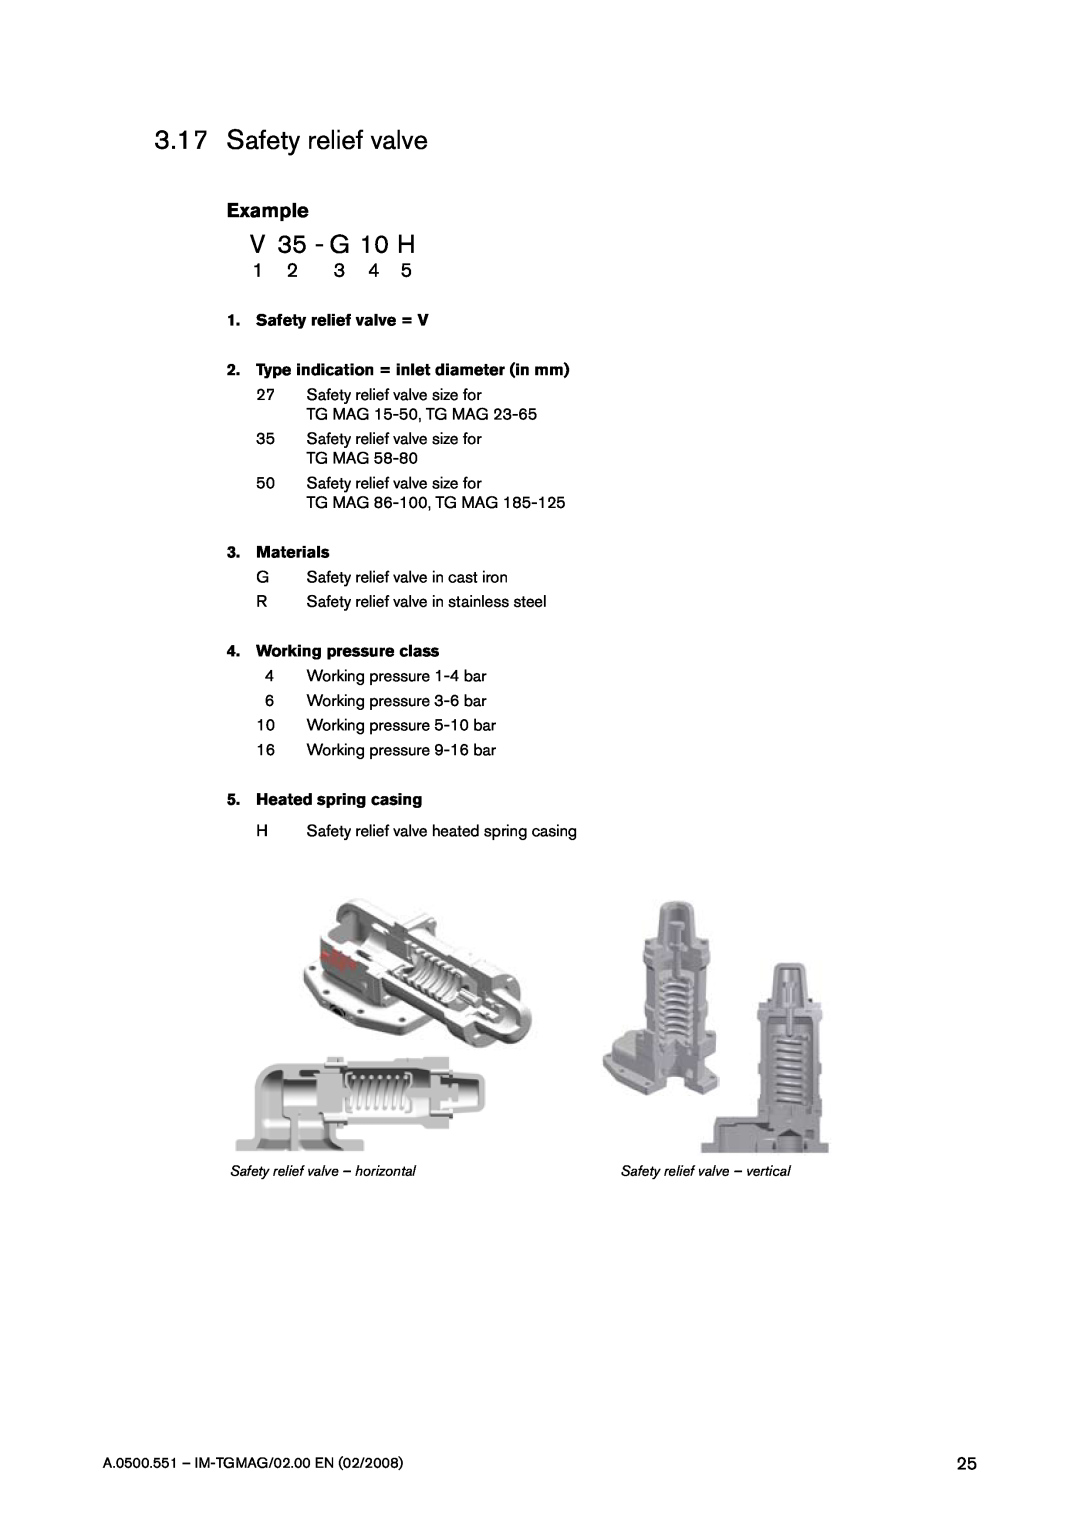 SPX Cooling Technologies TG MAG185-125 V 35 - G 10 H, Safety relief valve =, Type indication = inlet diameter in mm 